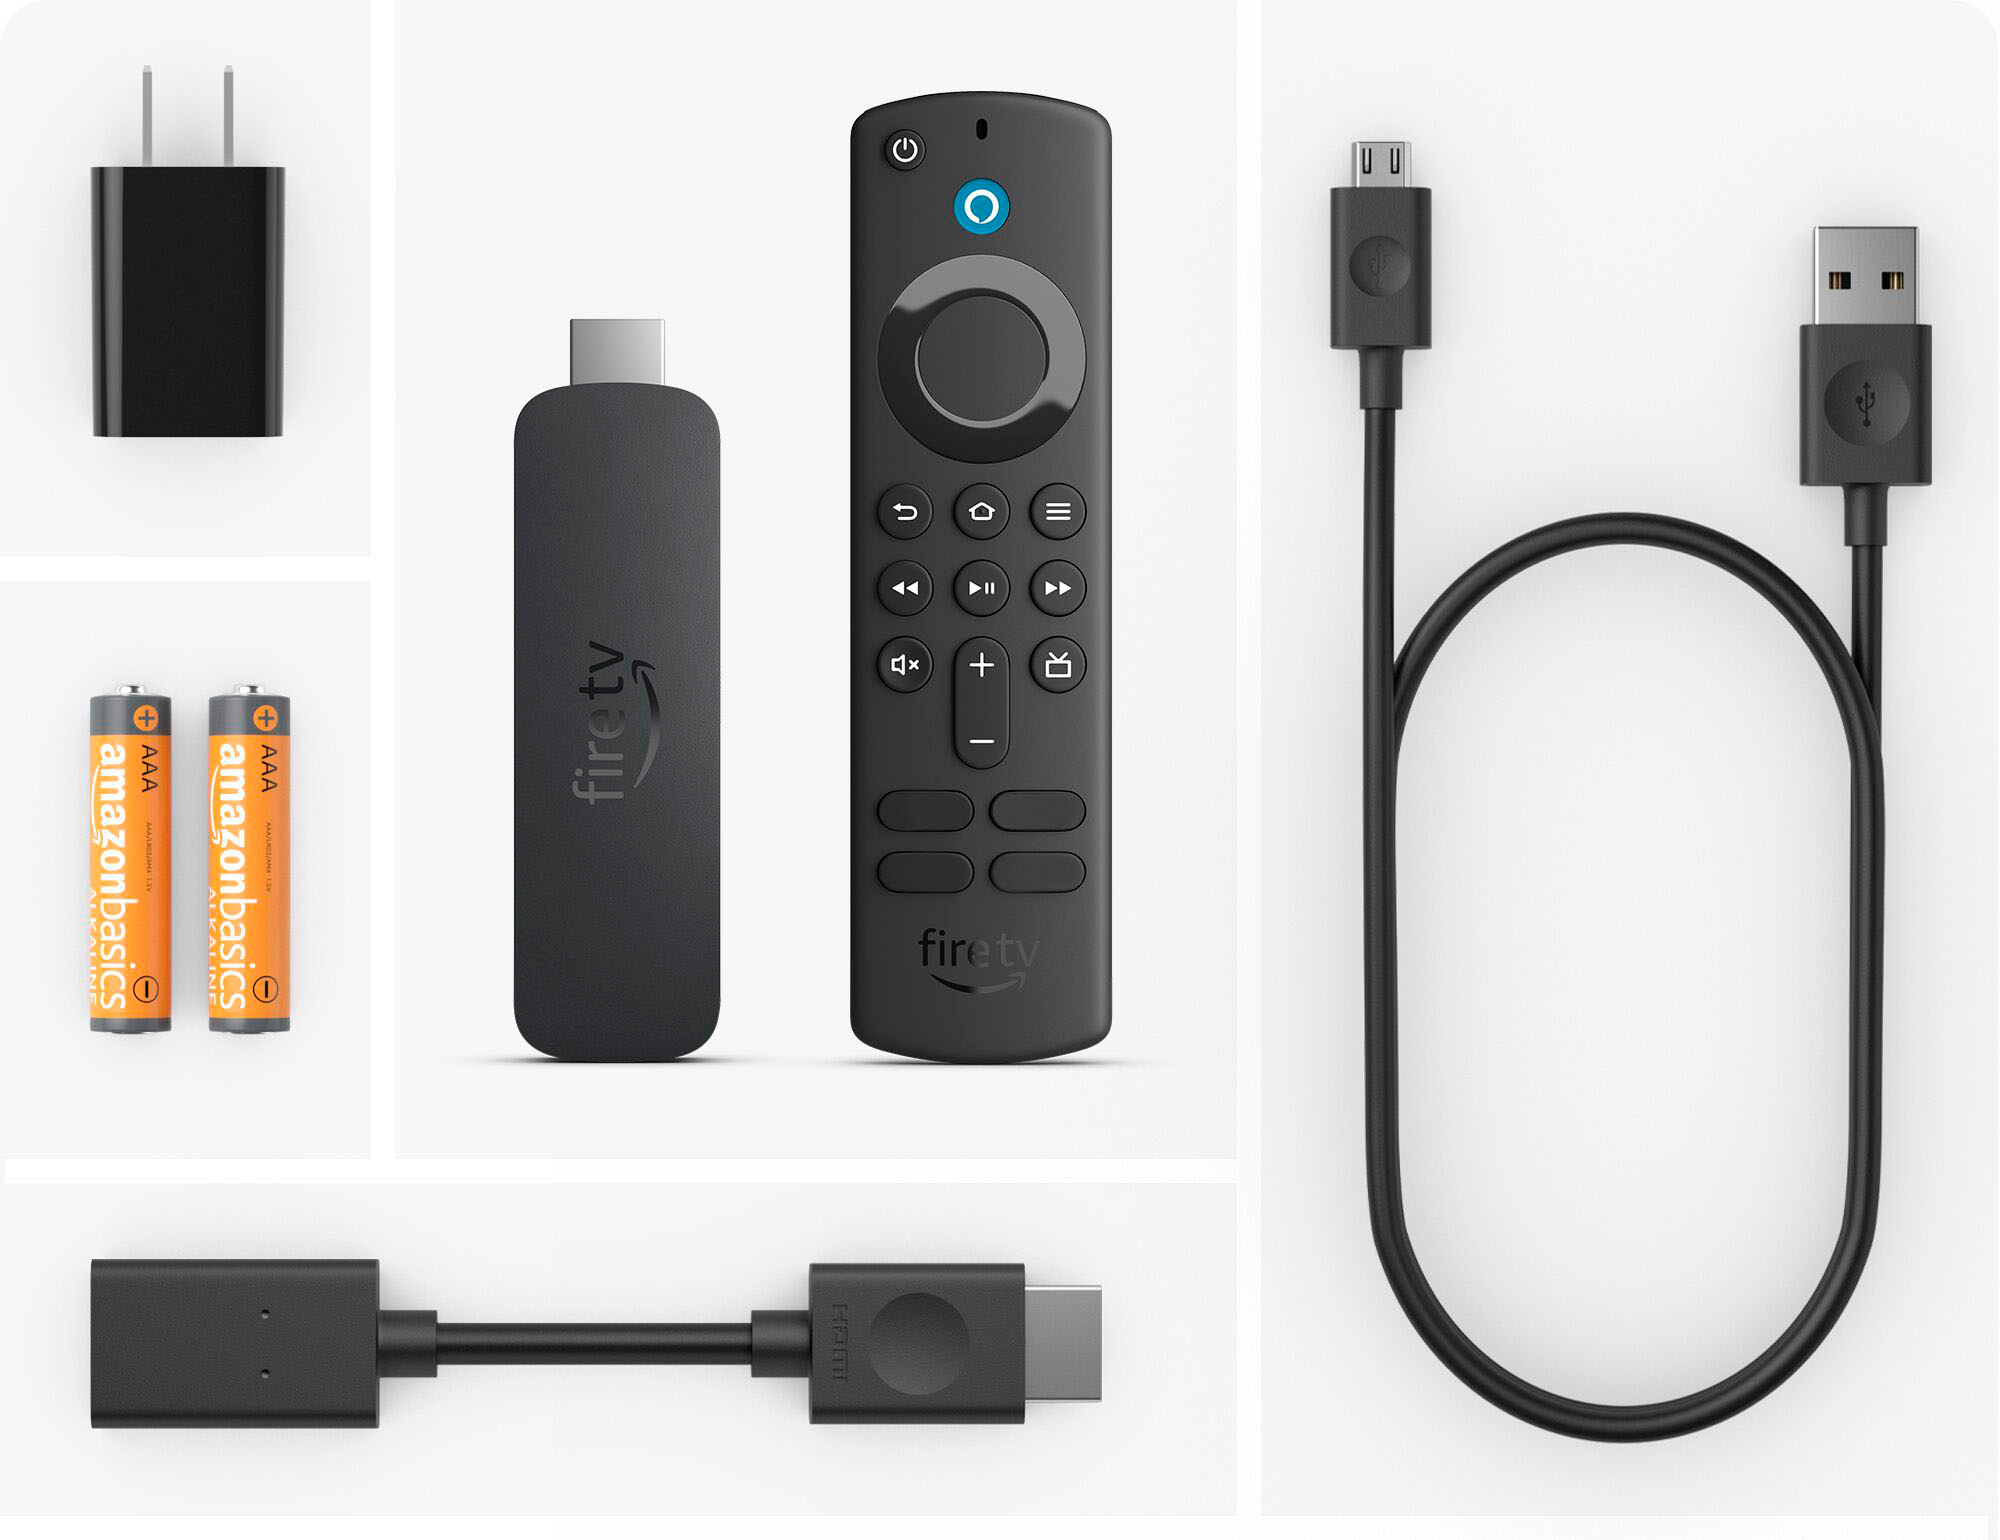 Amazon Fire TV Stick 4K streaming device, includes support for Wi